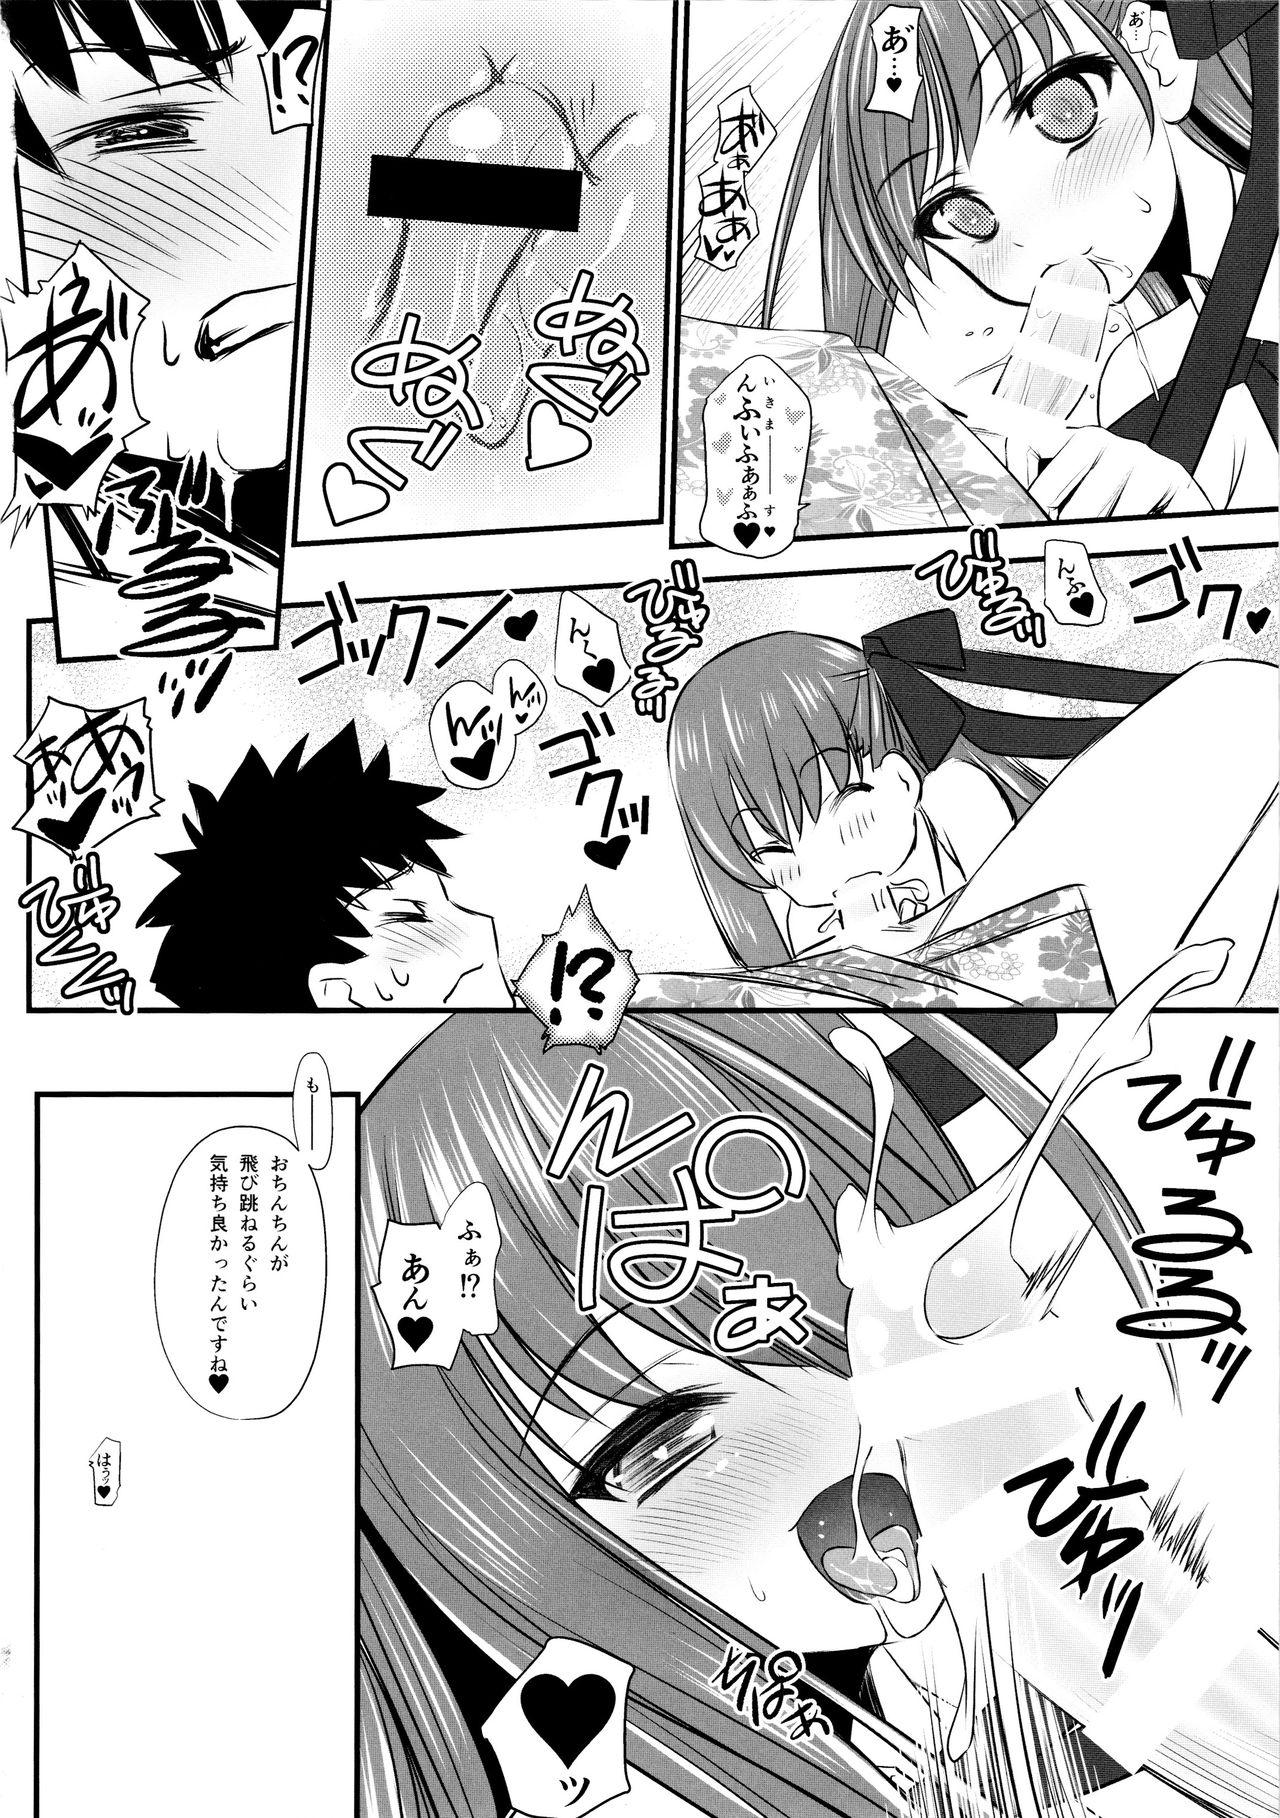 Livecams (C96) [Yakan Honpo (Inoue Tommy)] Queen [Kyuuin] BB-chan (Fate/Grand Order) - Fate grand order Argentino - Page 6